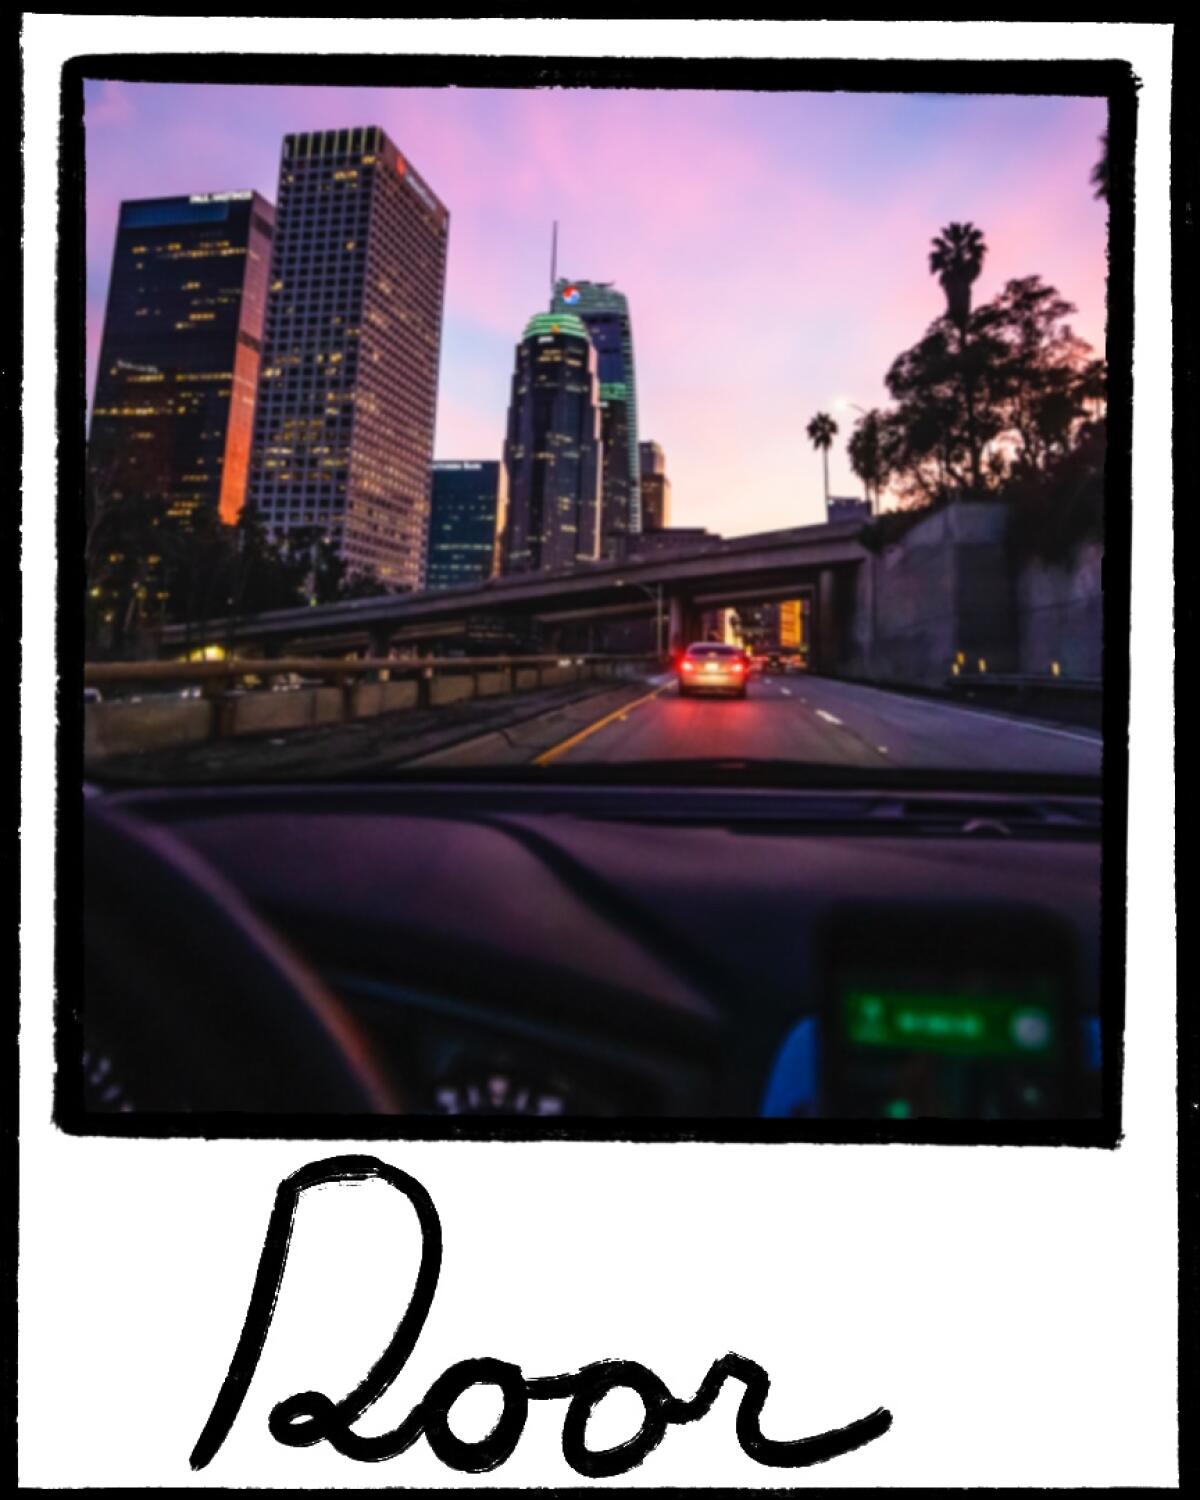 A view from behind the wheel of a car looking toward a city, with an illustrated polaroid shape around the photo